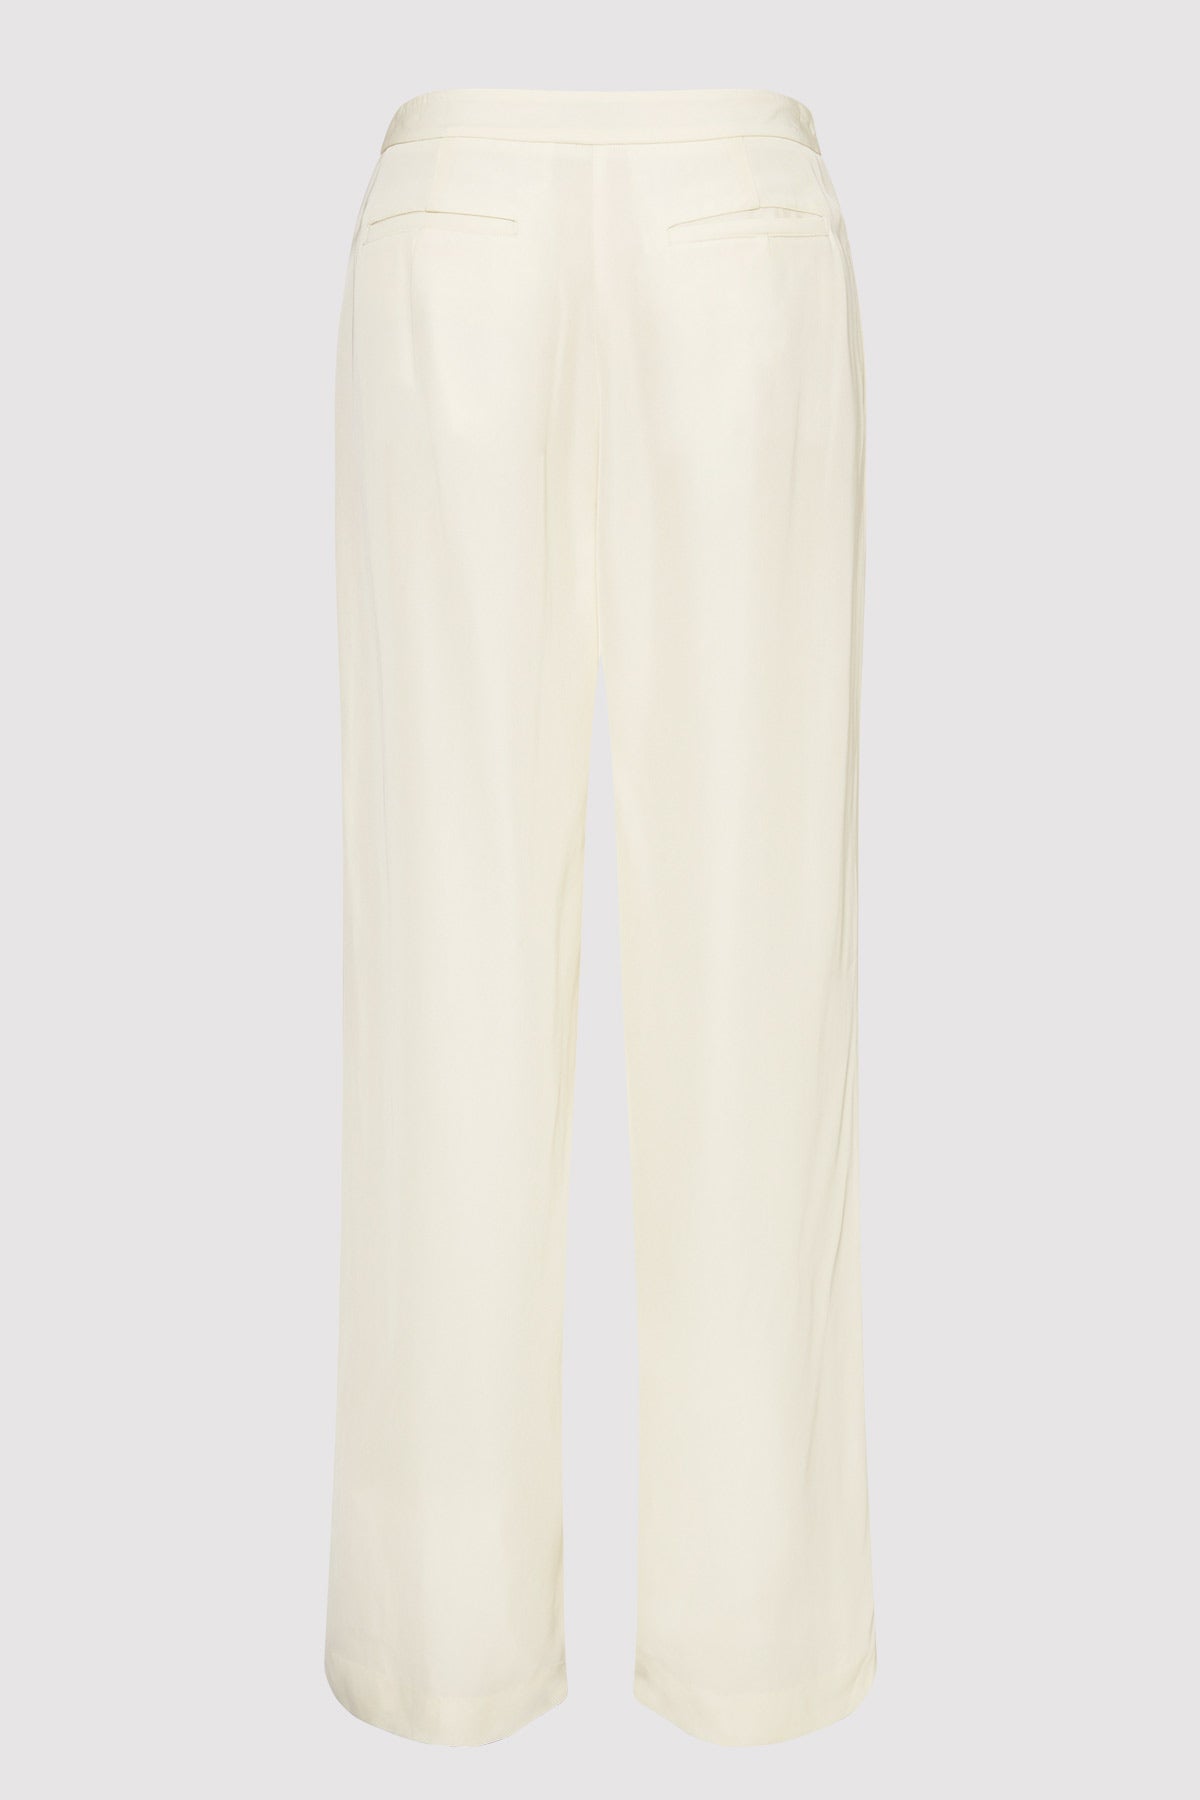 Overlap Waist Trousers - Cool White